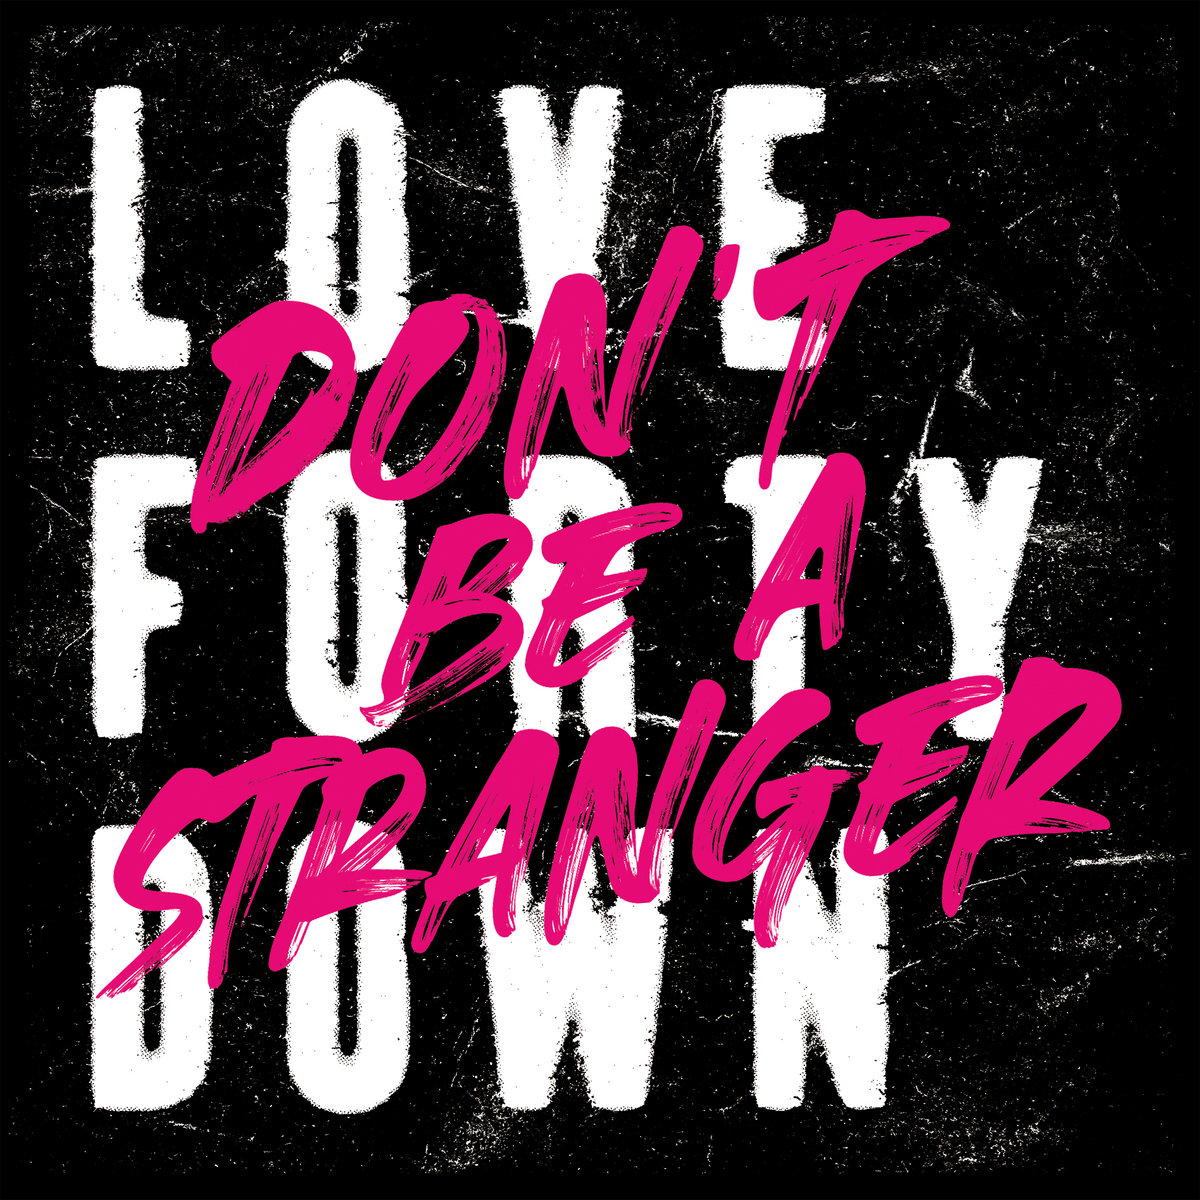 Drinkscussing: Love Forty Down – Don’t Be a Stranger